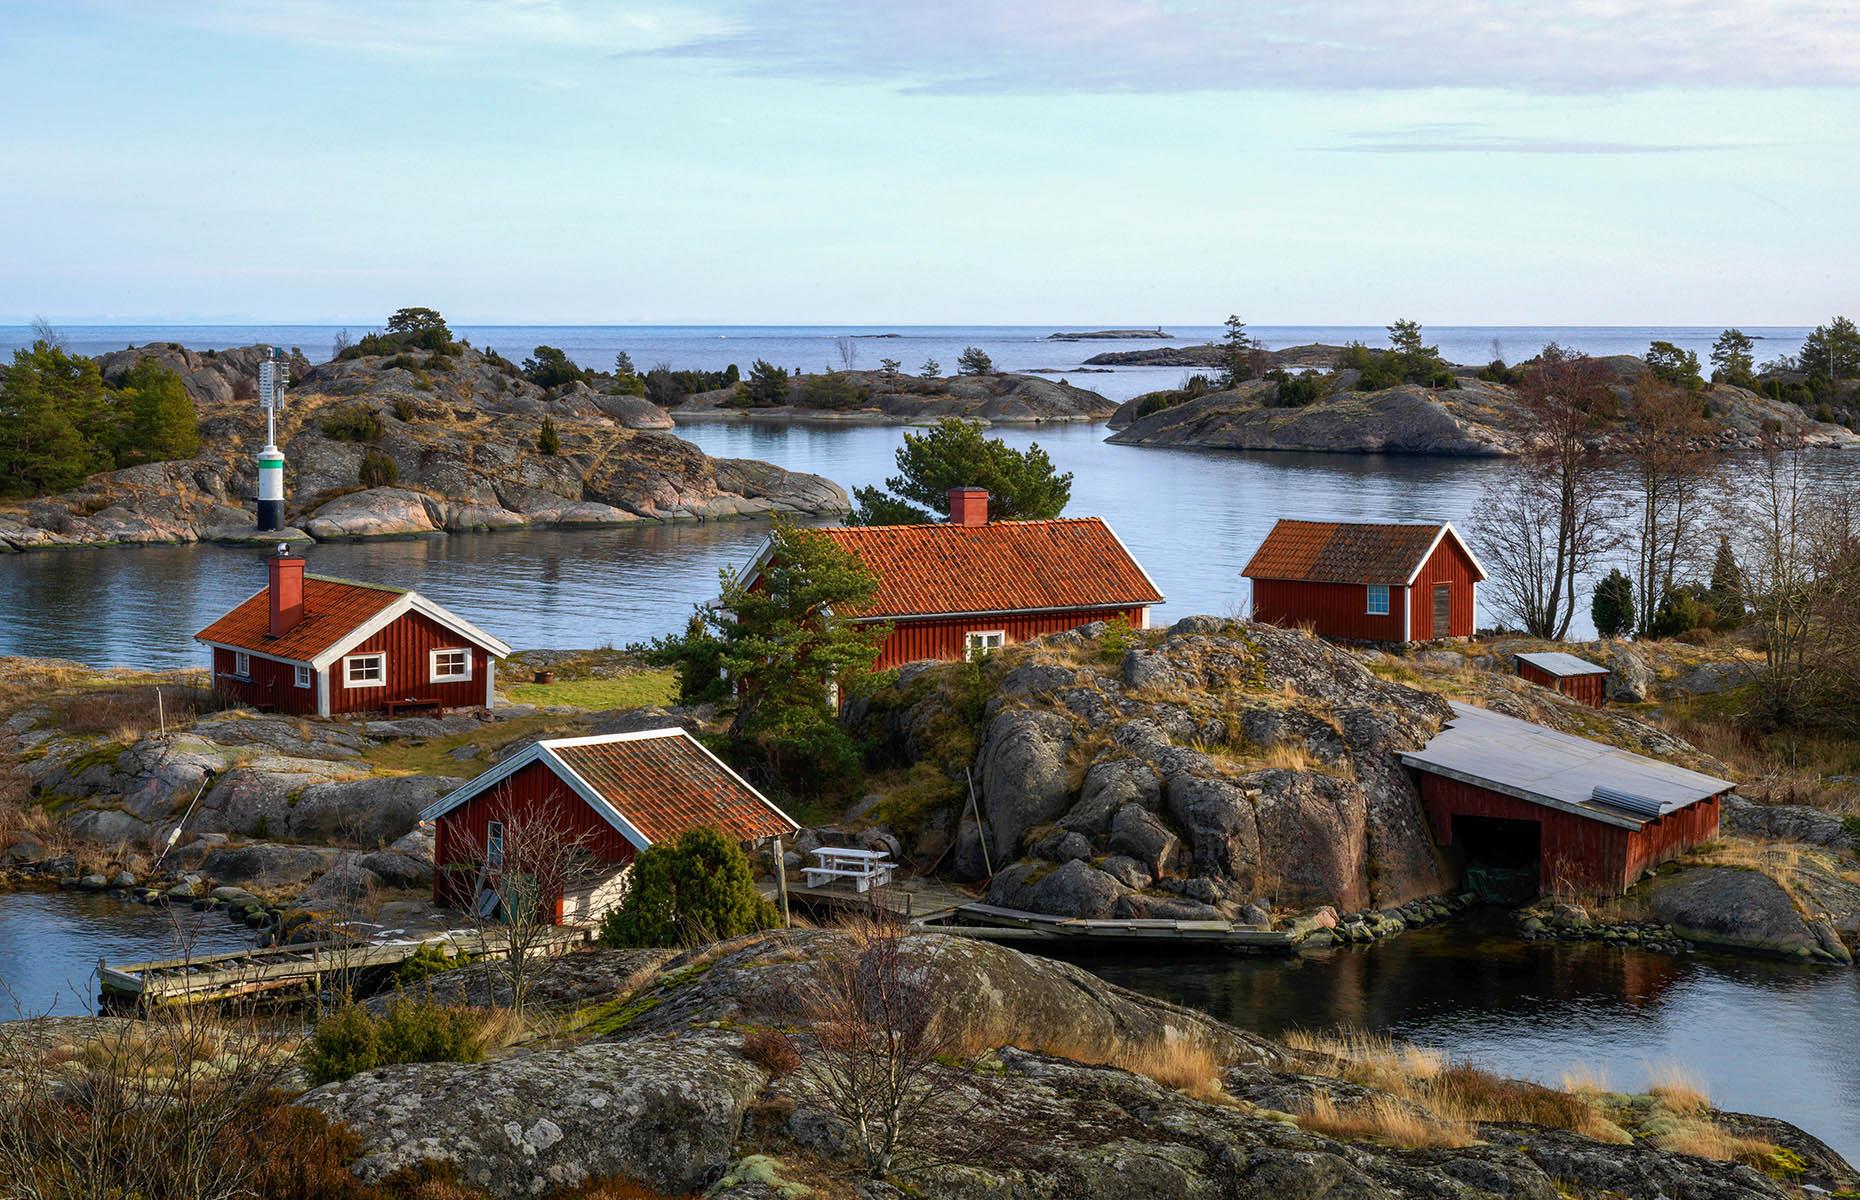 24 authentic things to do in the Swedish region known as 'Sweden for real'